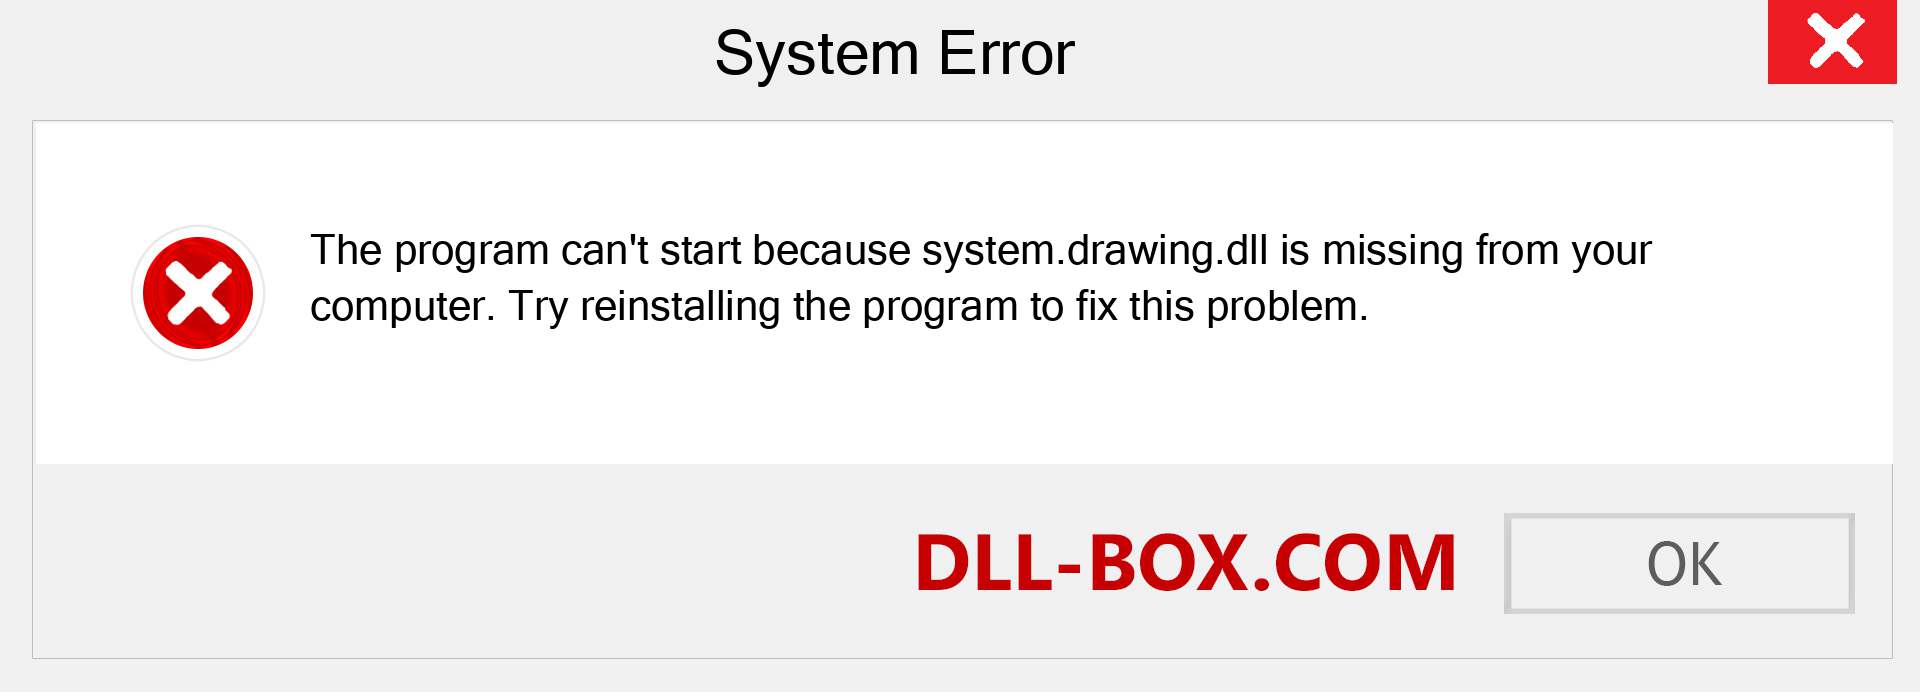  system.drawing.dll file is missing?. Download for Windows 7, 8, 10 - Fix  system.drawing dll Missing Error on Windows, photos, images